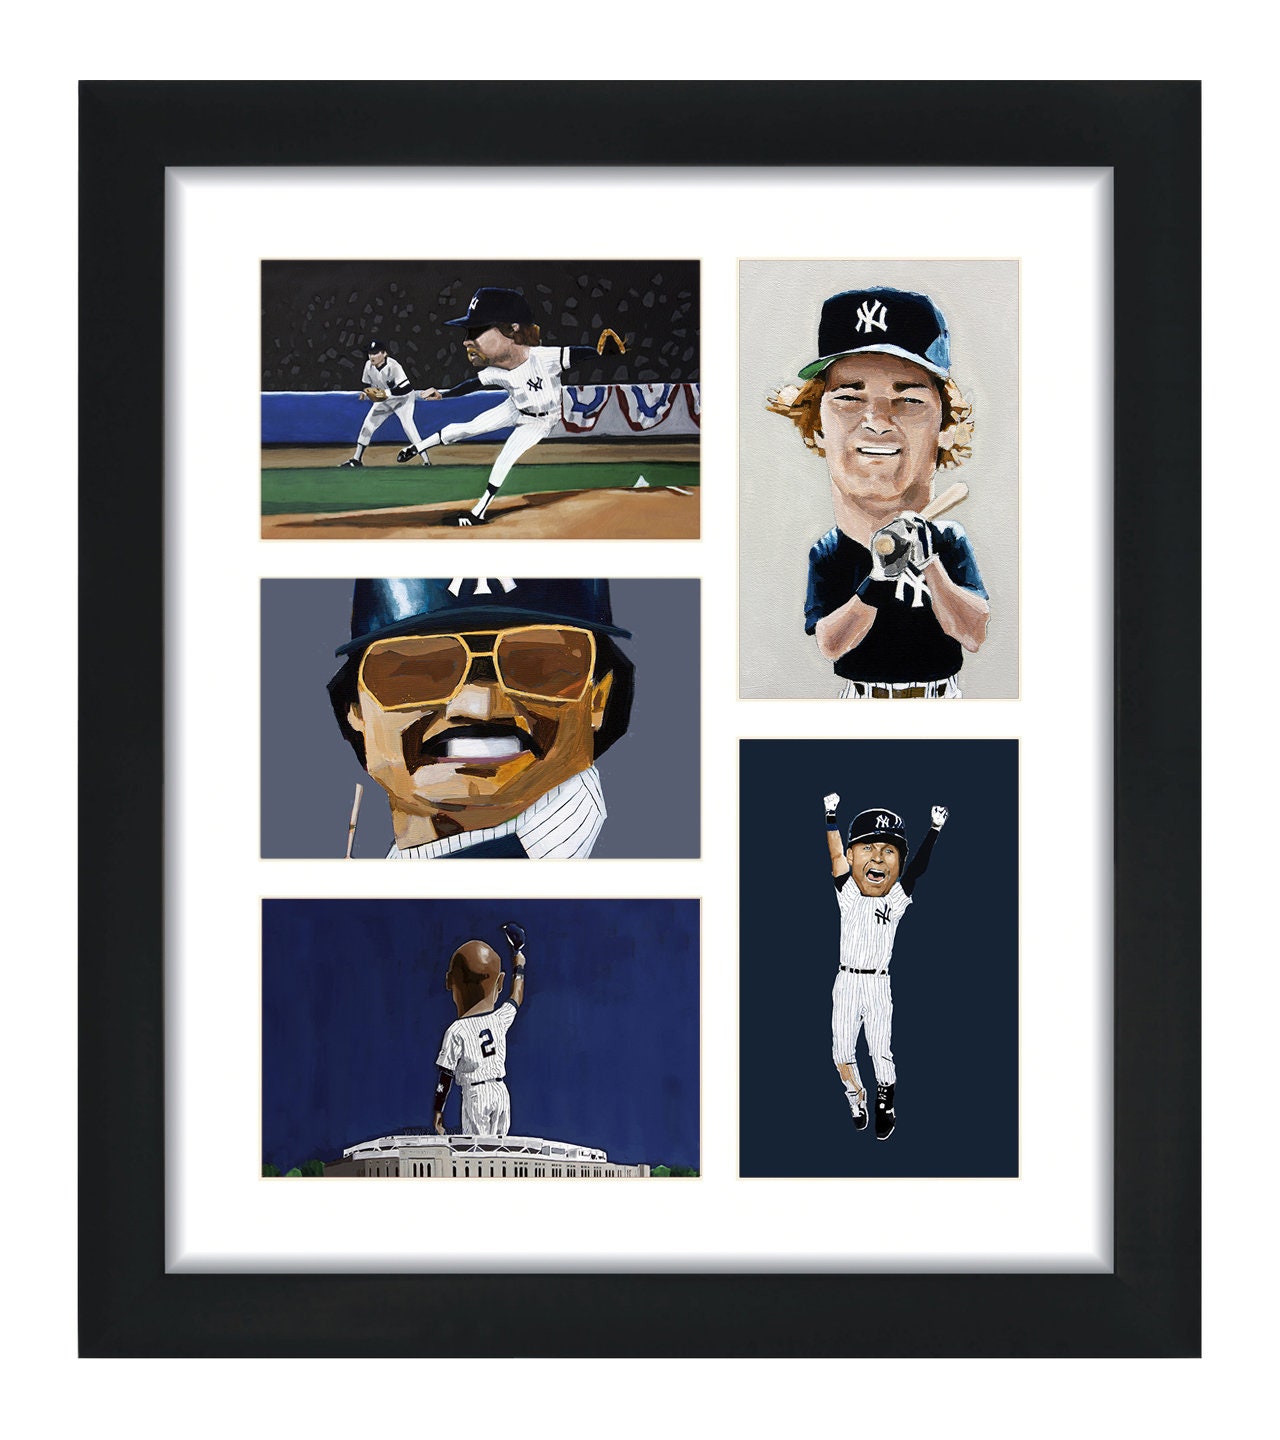 Buy SALE. Five Individual 4x6 Prints of the New York Yankees. SAVE